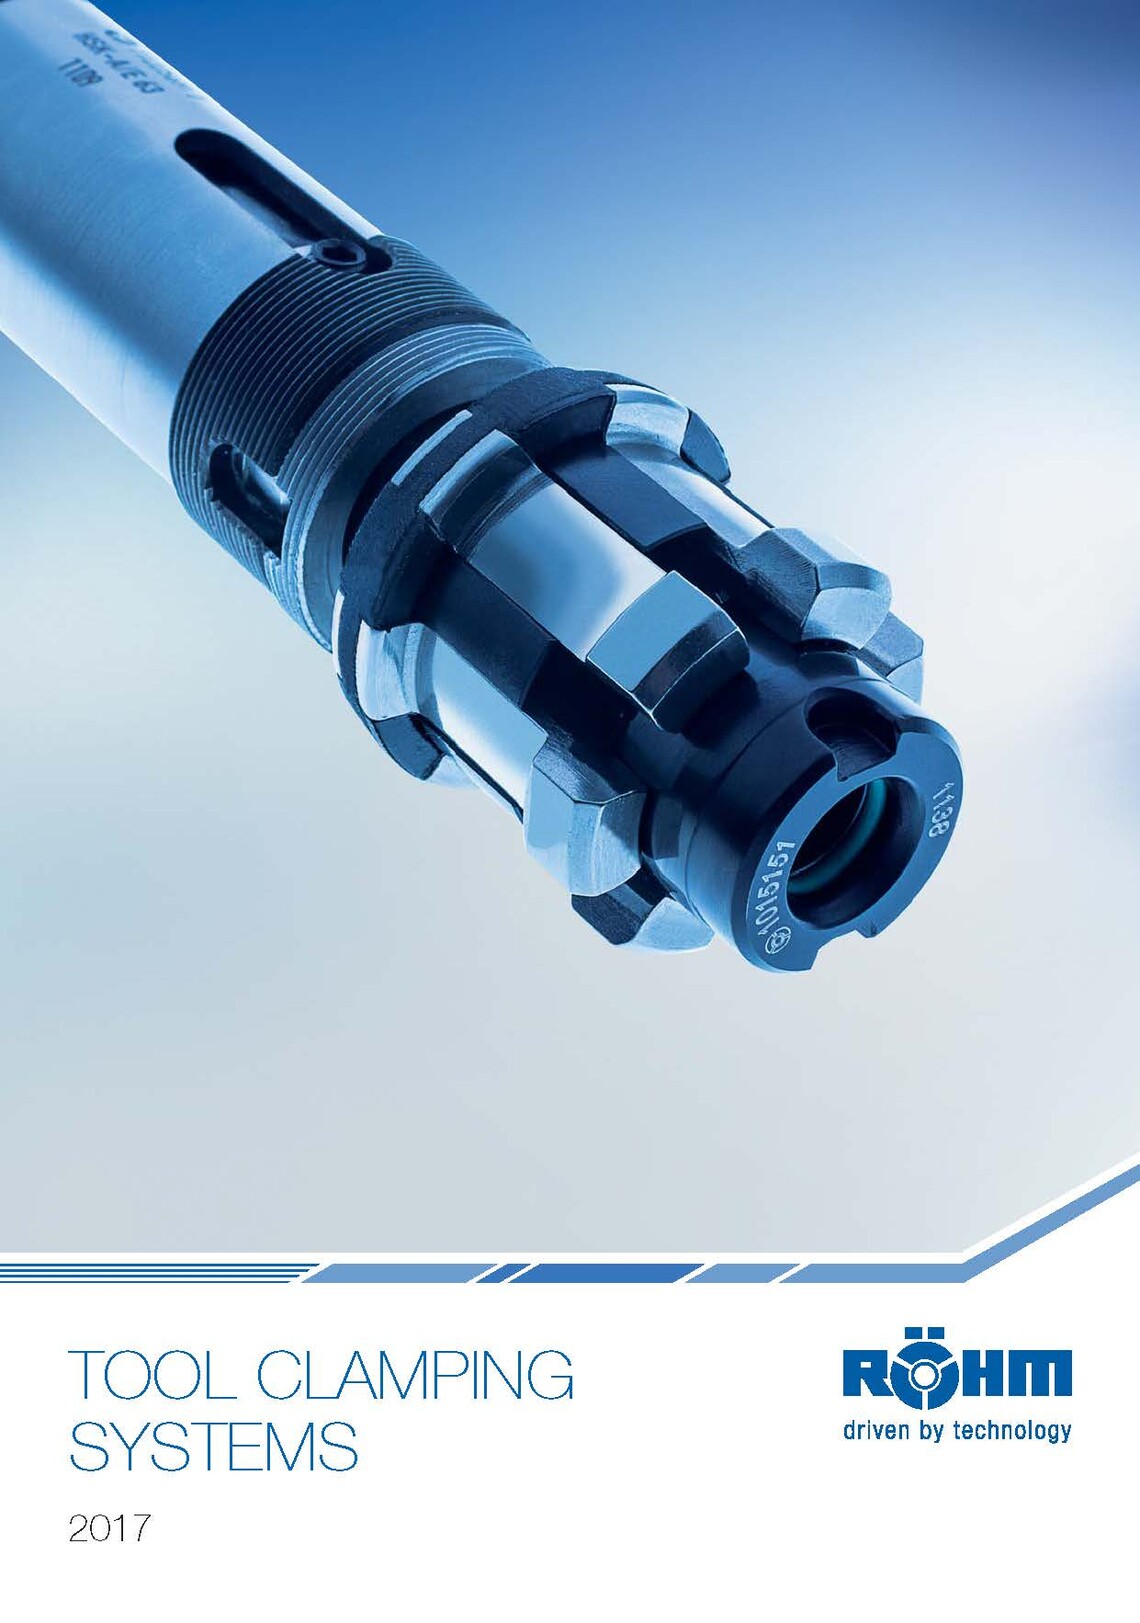 Tool clamping systems